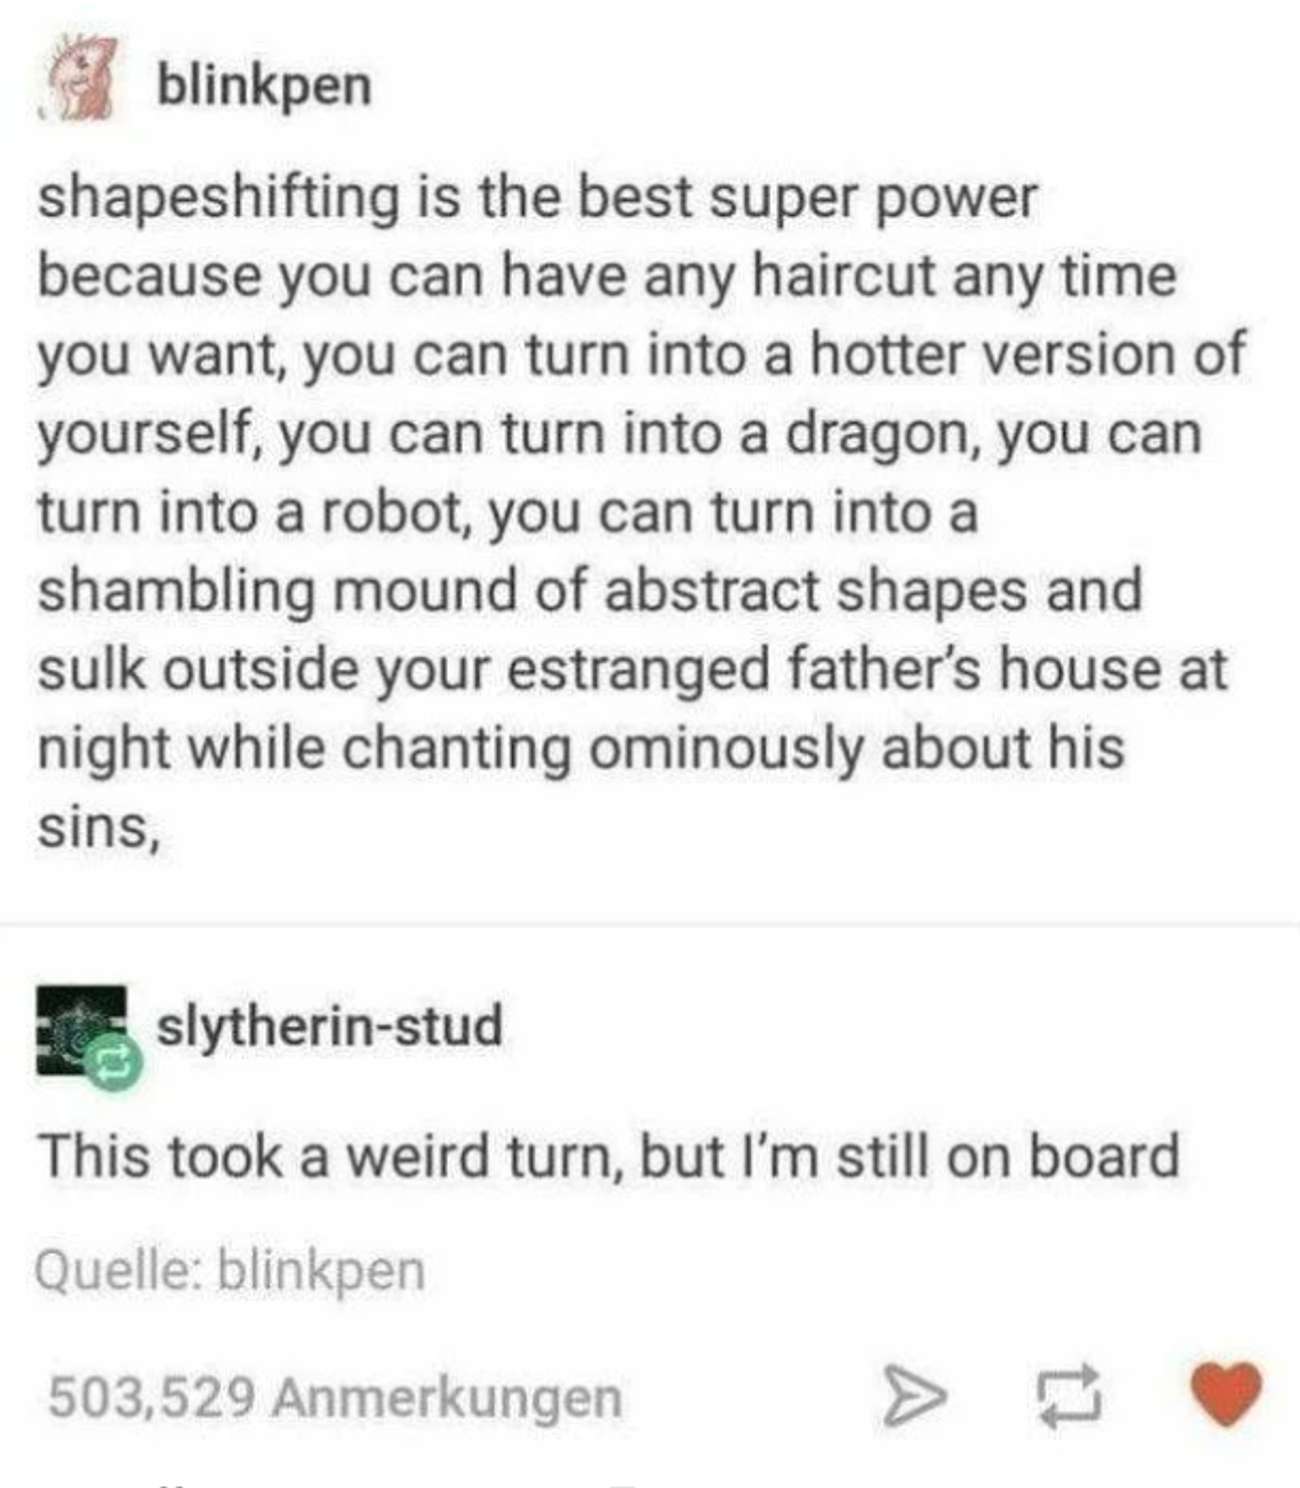 shapeshifting+in+the+best+super+power